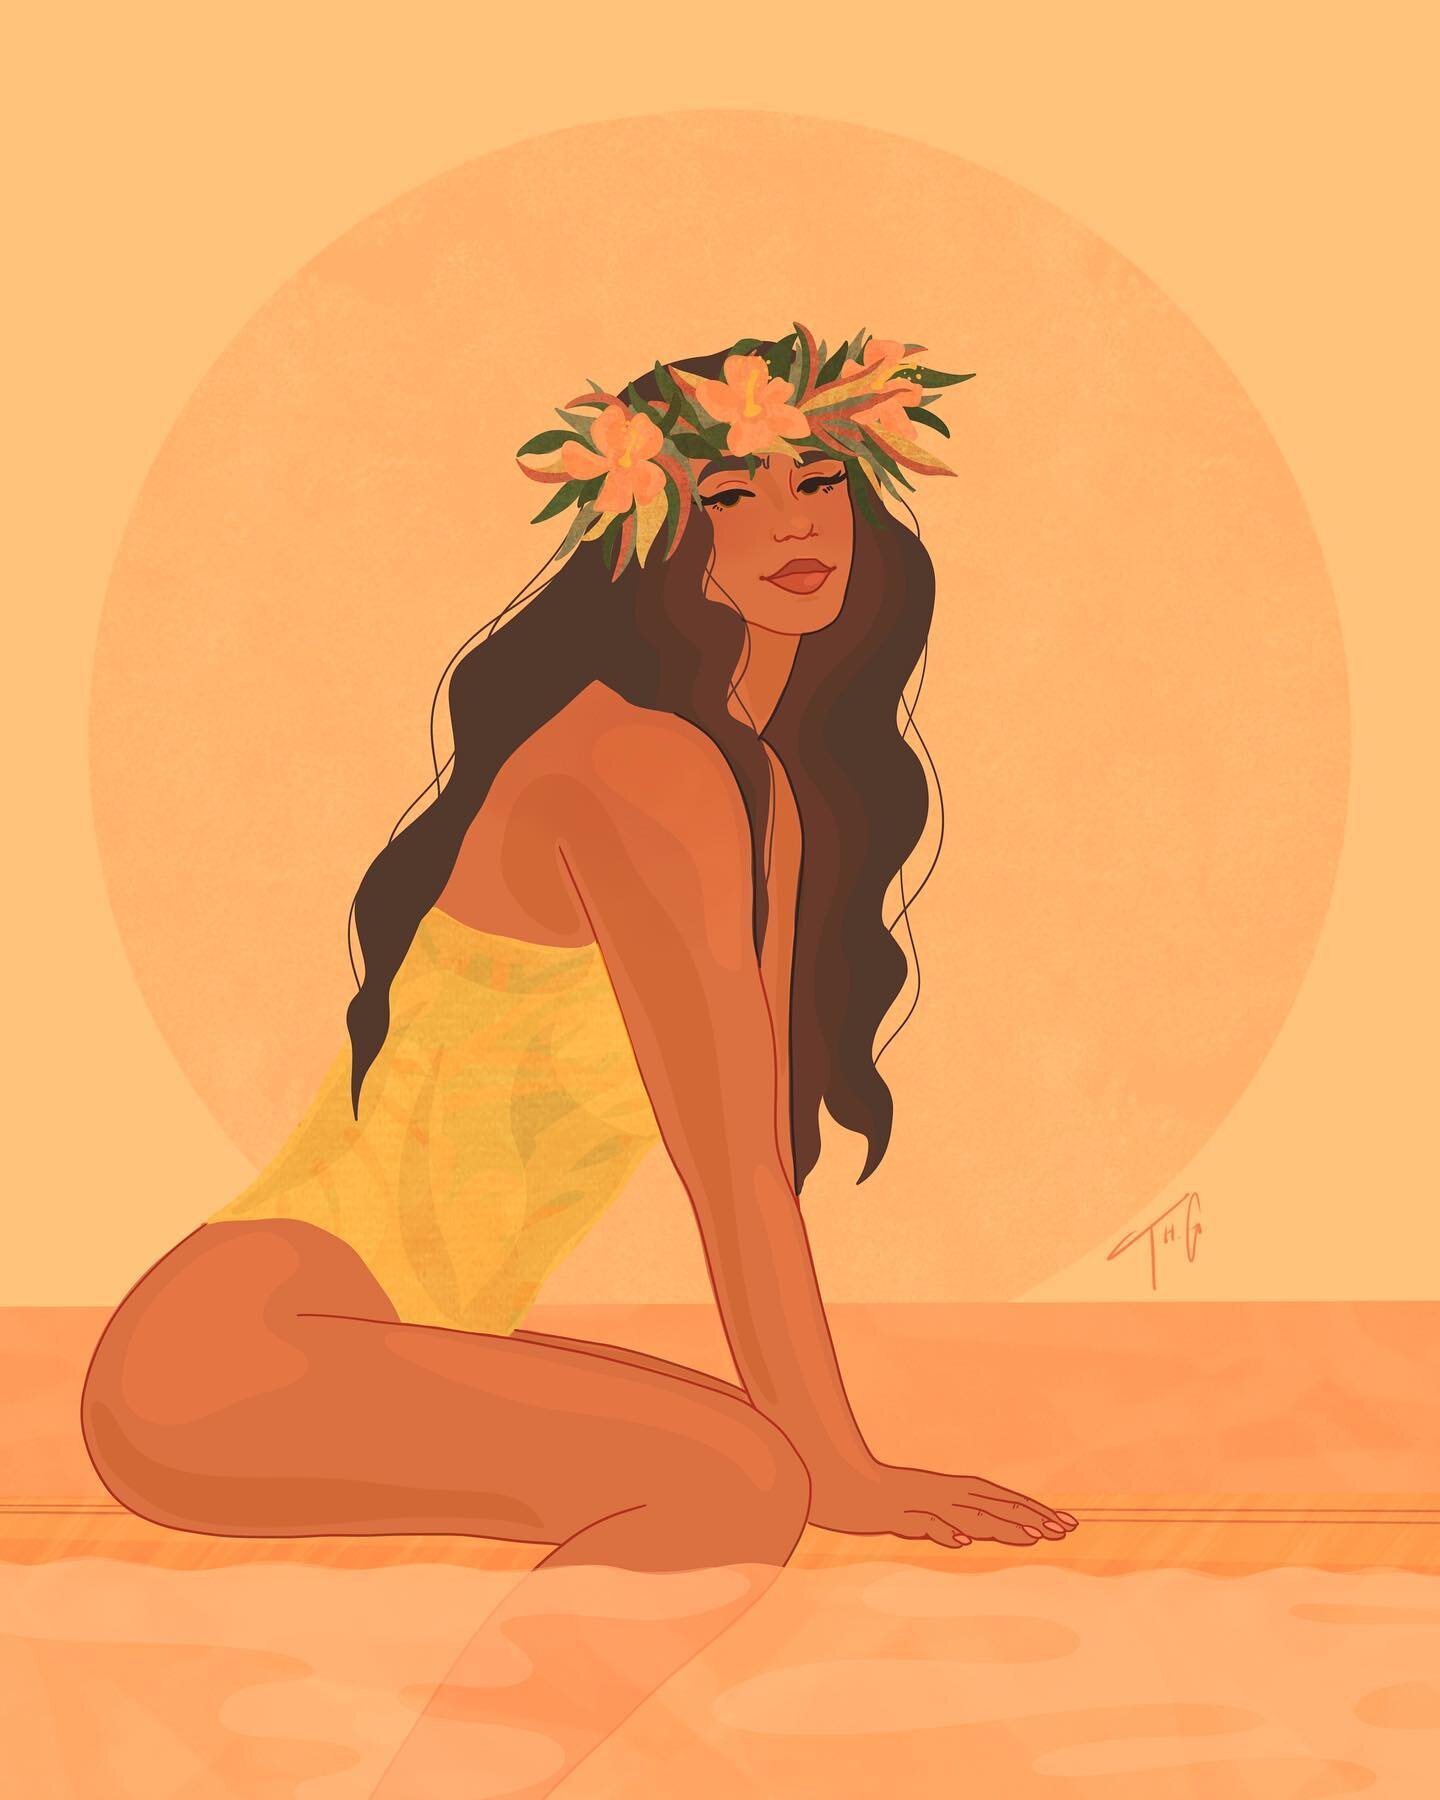 &ldquo;Wahine in the Moment&rdquo;

Recently I have been in these mini episodes of being invested in one thing, but forgetting everything else&hellip; sometimes I would forget about my wellbeing. Anyone else been in this dilemma?

This is a reminder 